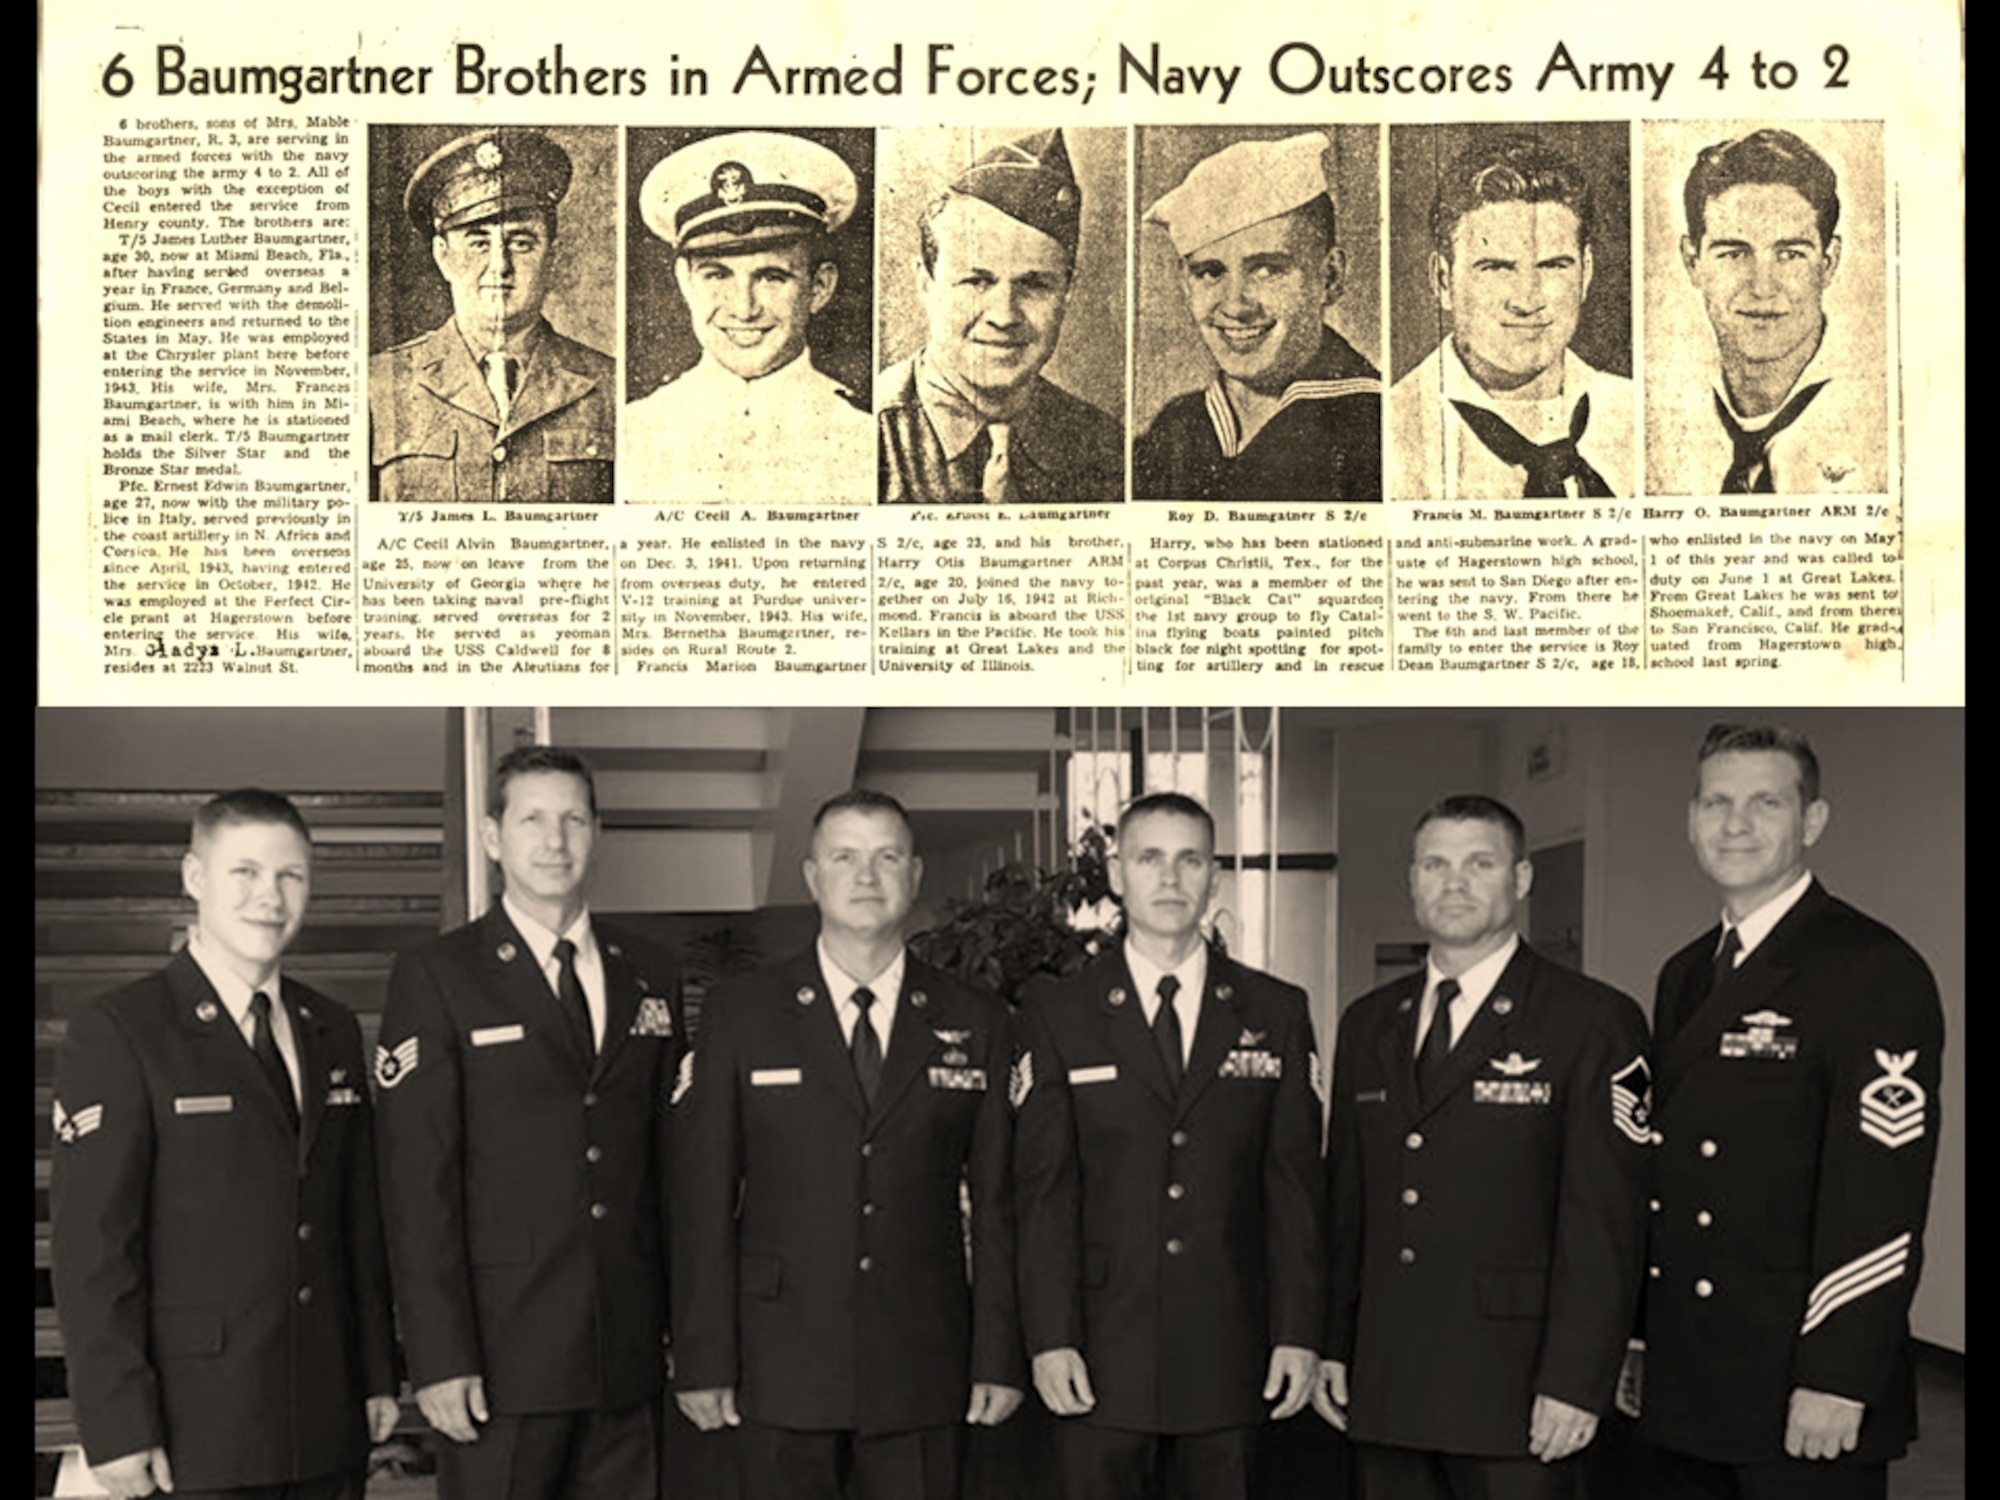 A news clipping from 1945 shows Roy Baumgartner and his five brothers in uniform during World War II, a nostalgic comparison to Roy's six grandsons shown beneath the clipping at Roy's funeral in June, 2017.